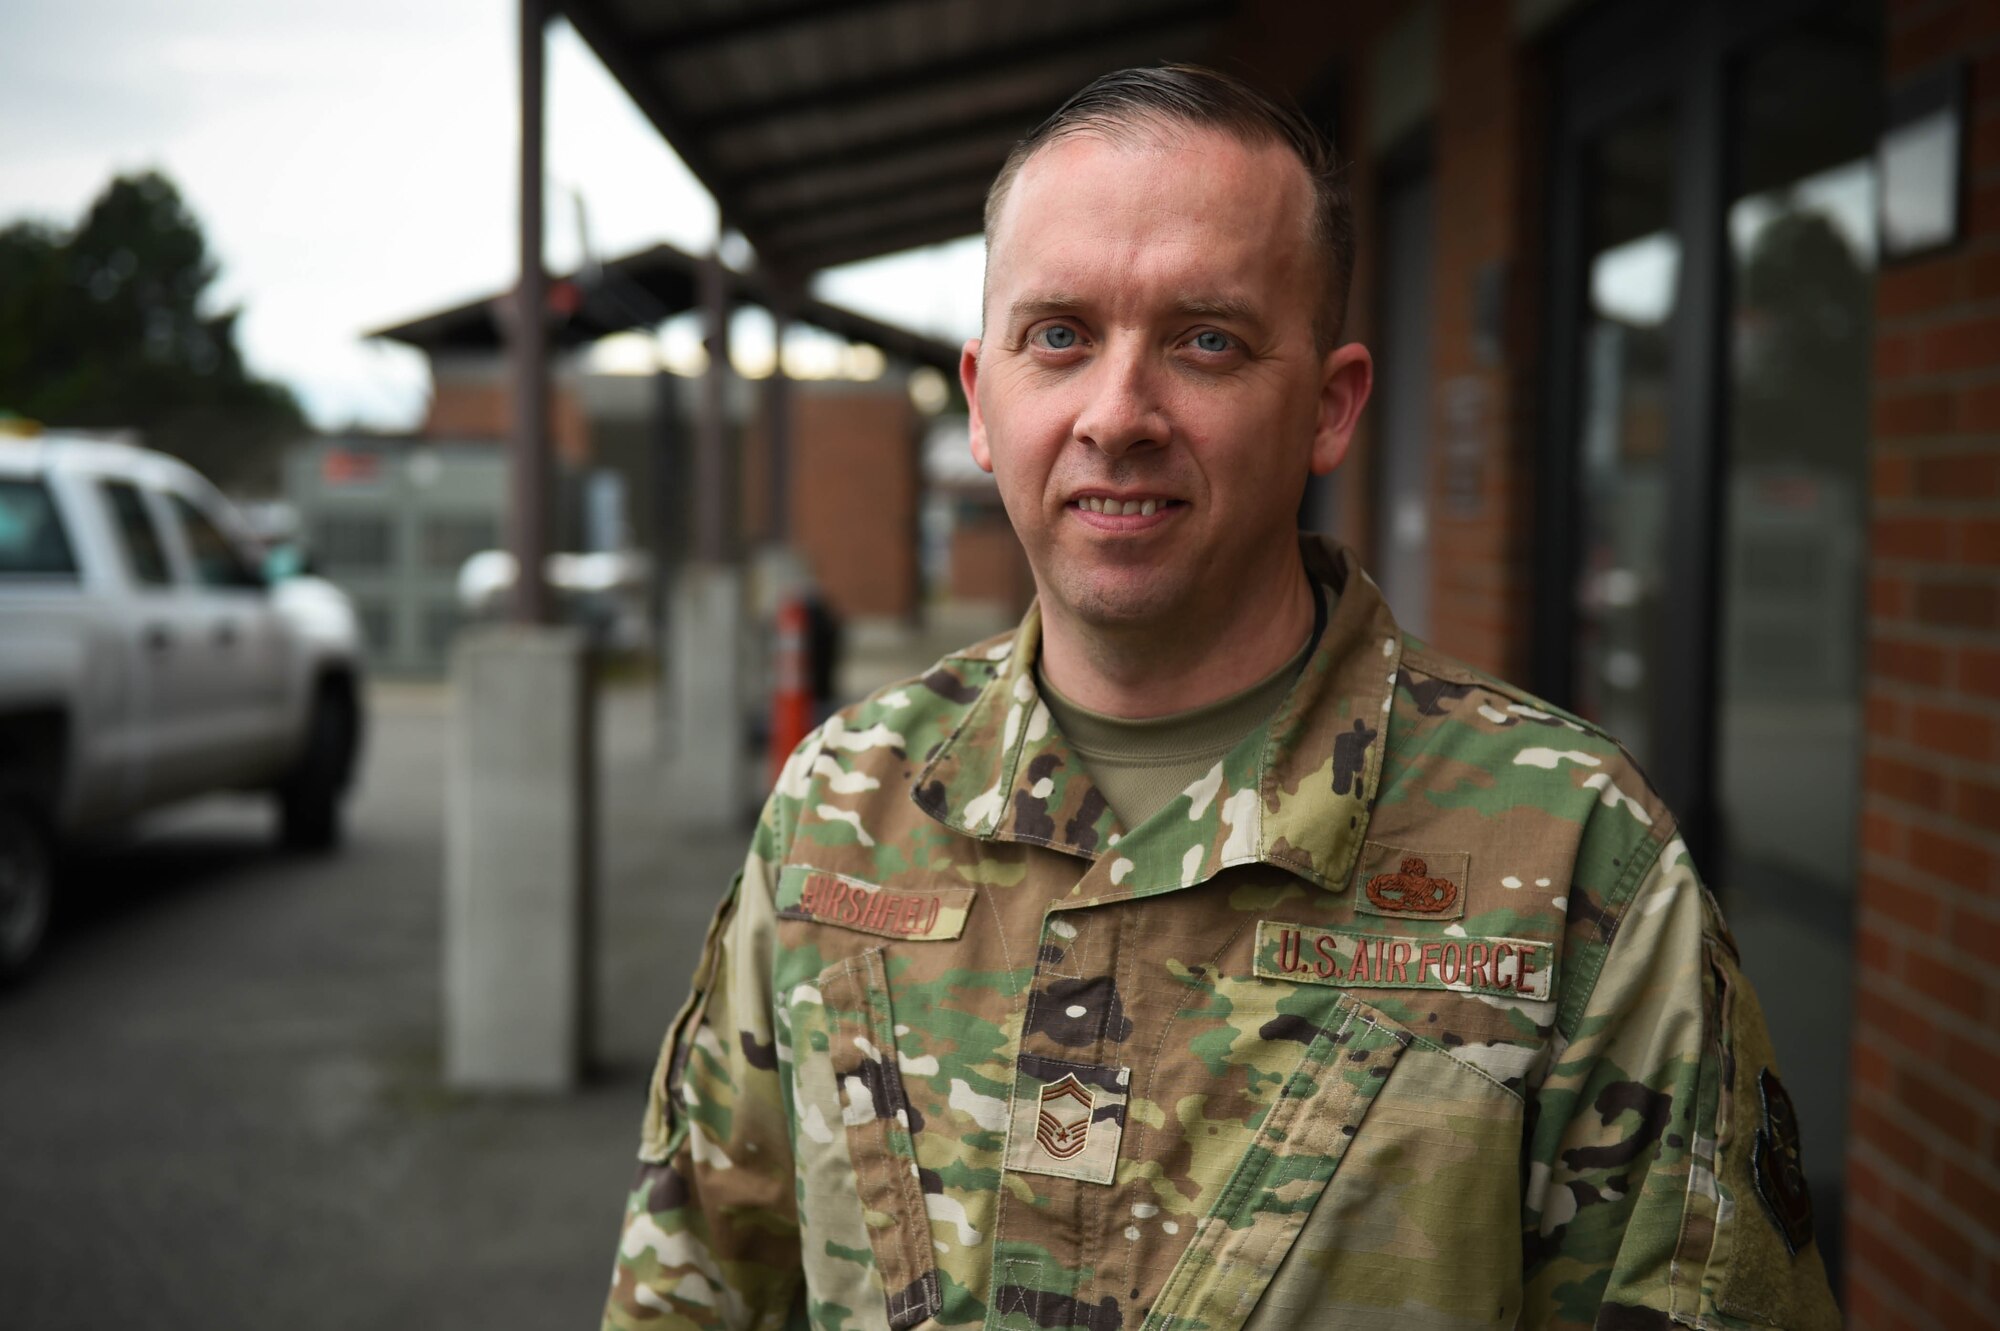 Senior Master Sgt. Derek Hirshfield, 62nd Aircraft Maintenance Squadron lead production superintendent, poses for a photo on Joint Base Lewis-McChord, Wash., Dec. 3, 2019. He was one of the nine McChord Airmen selected this year for promotion to chief master sergeant, the highest enlisted rank in the Air Force. 

“Throughout my career, I have worked with countless individuals from multiple different Air Force specialties and missions along the way that ultimately shaped who I am and aspire to be. Moving forward as a chief allows me to take that experience and give back.  
A good piece of advice I received was to network. Getting outside your unit and learning about other career fields and how they contribute to the mission allows you better appreciate the team effort required to provide combat airlift.  
Thank you to everyone who helped me get here. I am proud and excited to be a part of Team McChord.”

(U.S. Air Force photo by Airman 1st Class Mikayla Heineck)